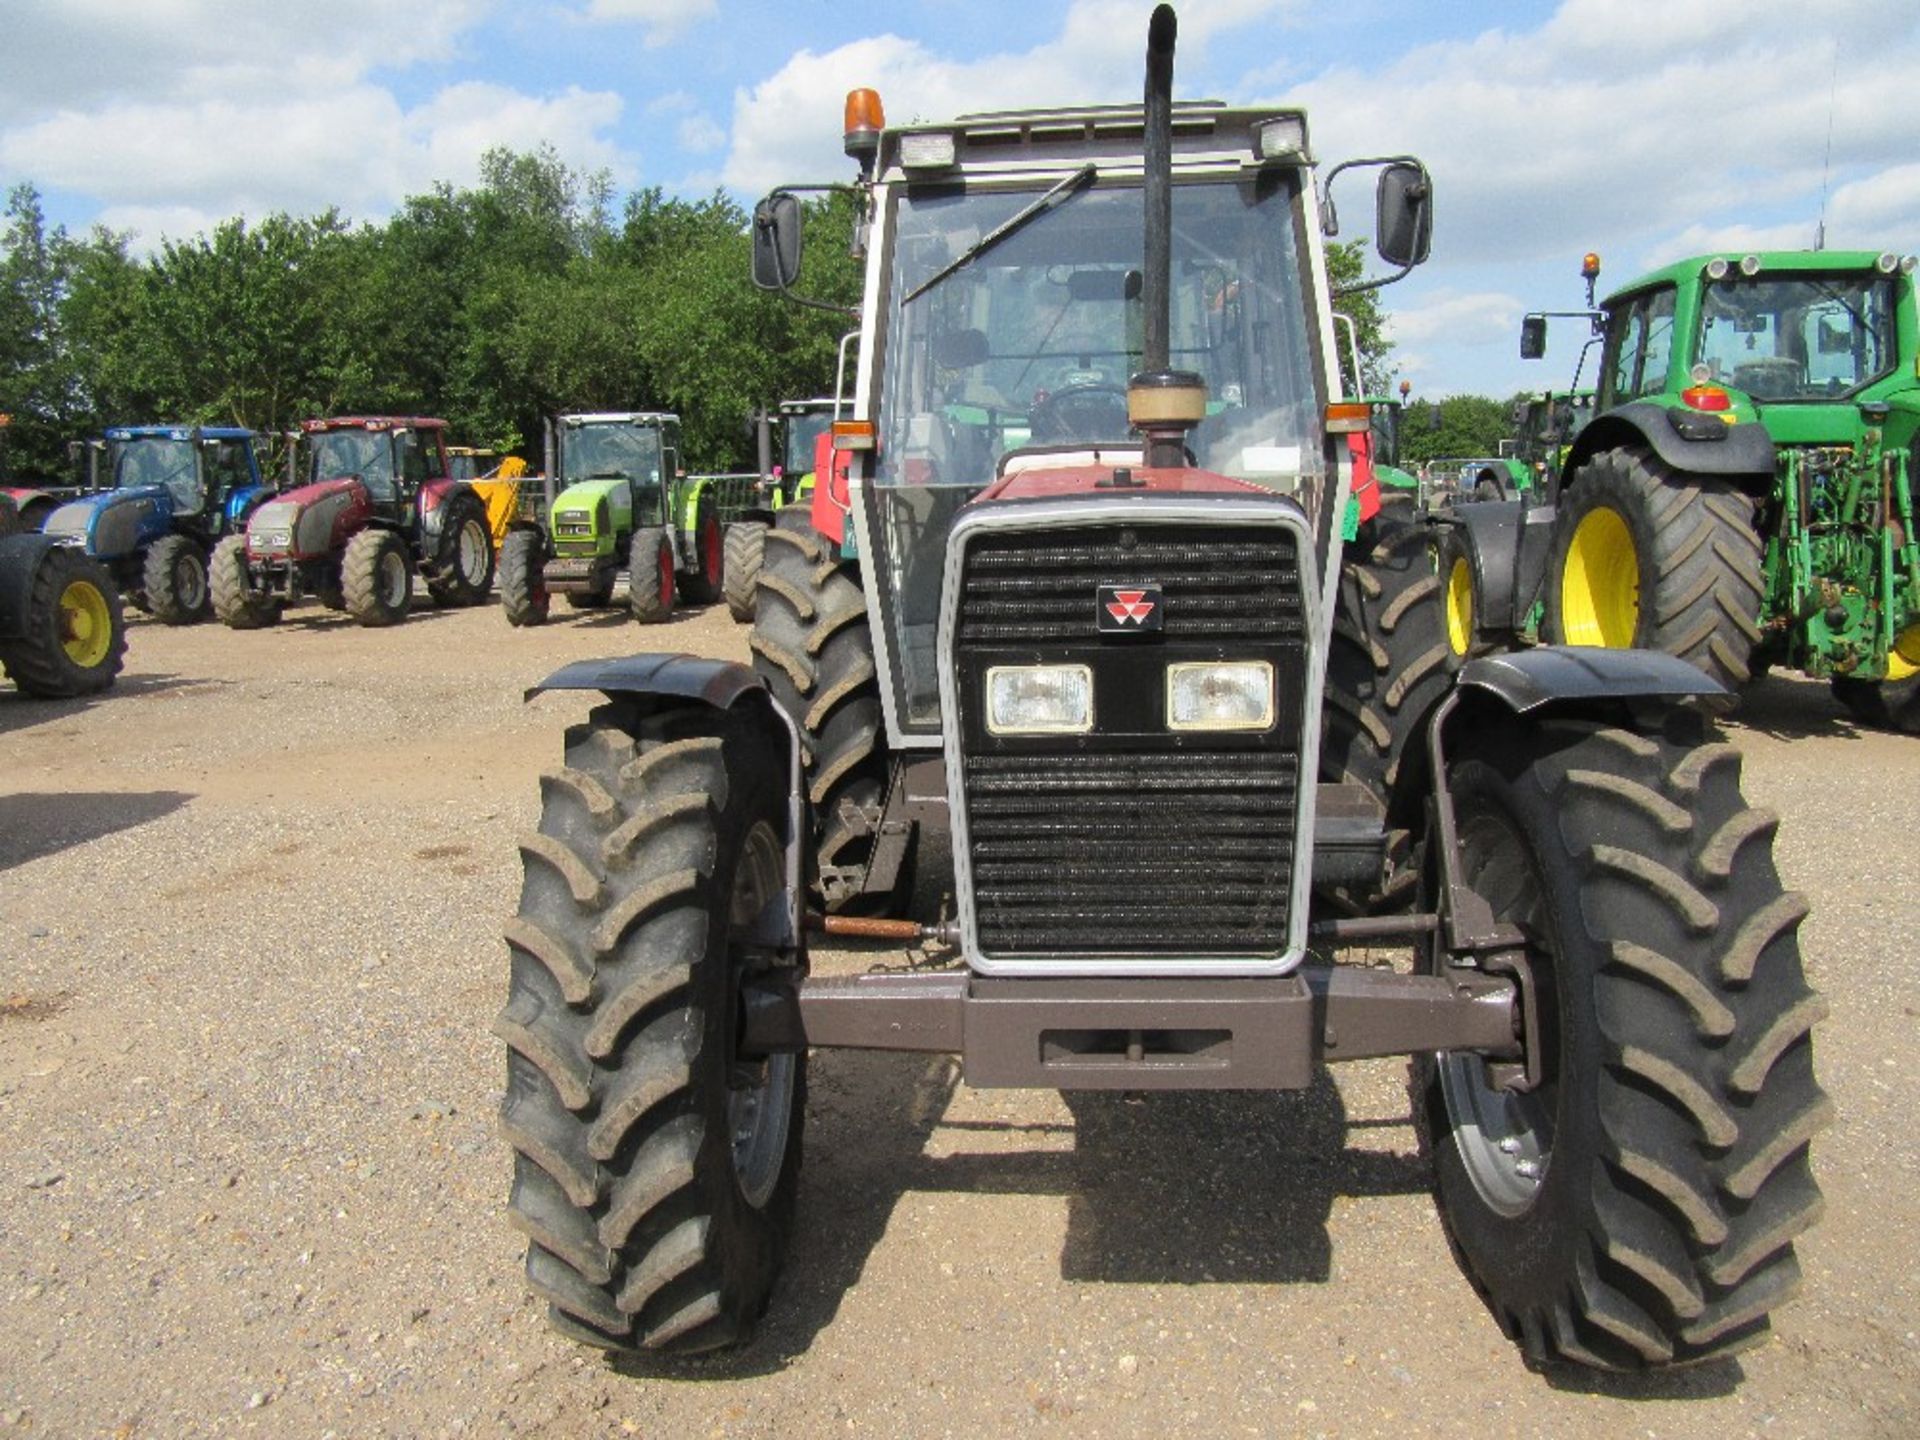 1996 Massey Ferguson 399 Tractor 1 Owner from new. Reg No P946 YSS Ser No E271290 - Image 2 of 13